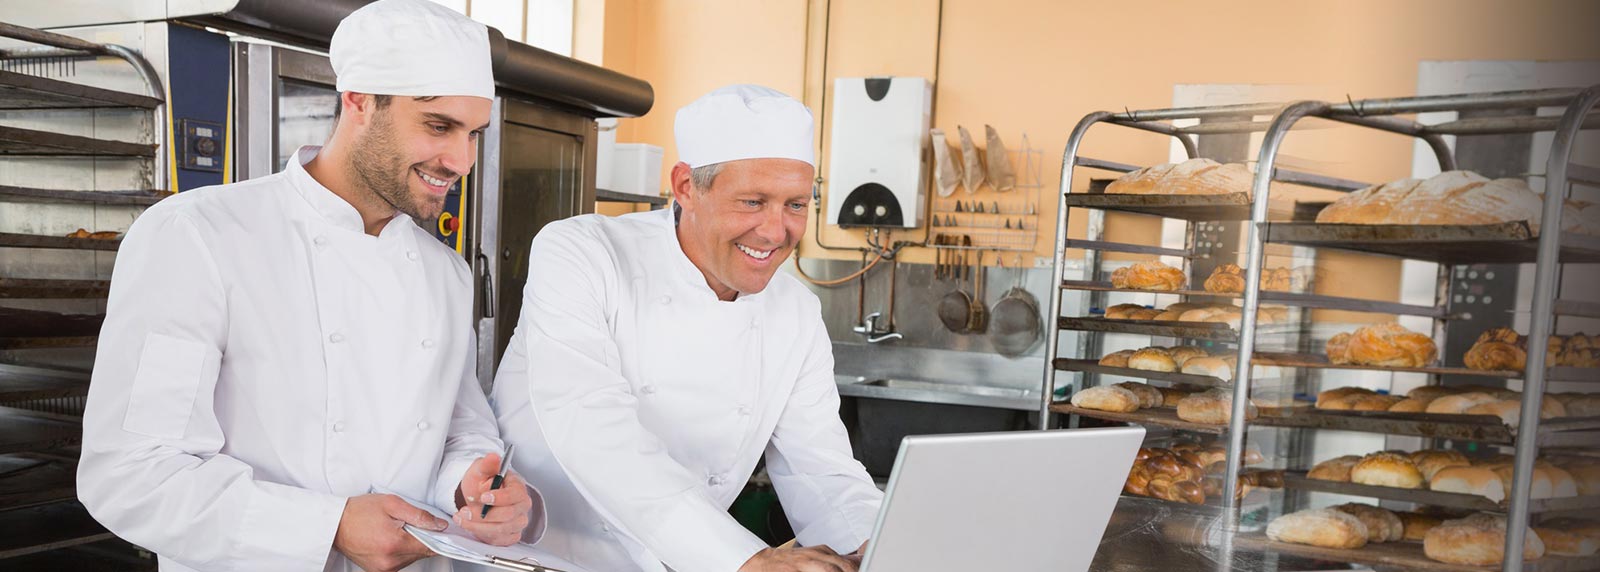 Accounting Software for Bakery Business